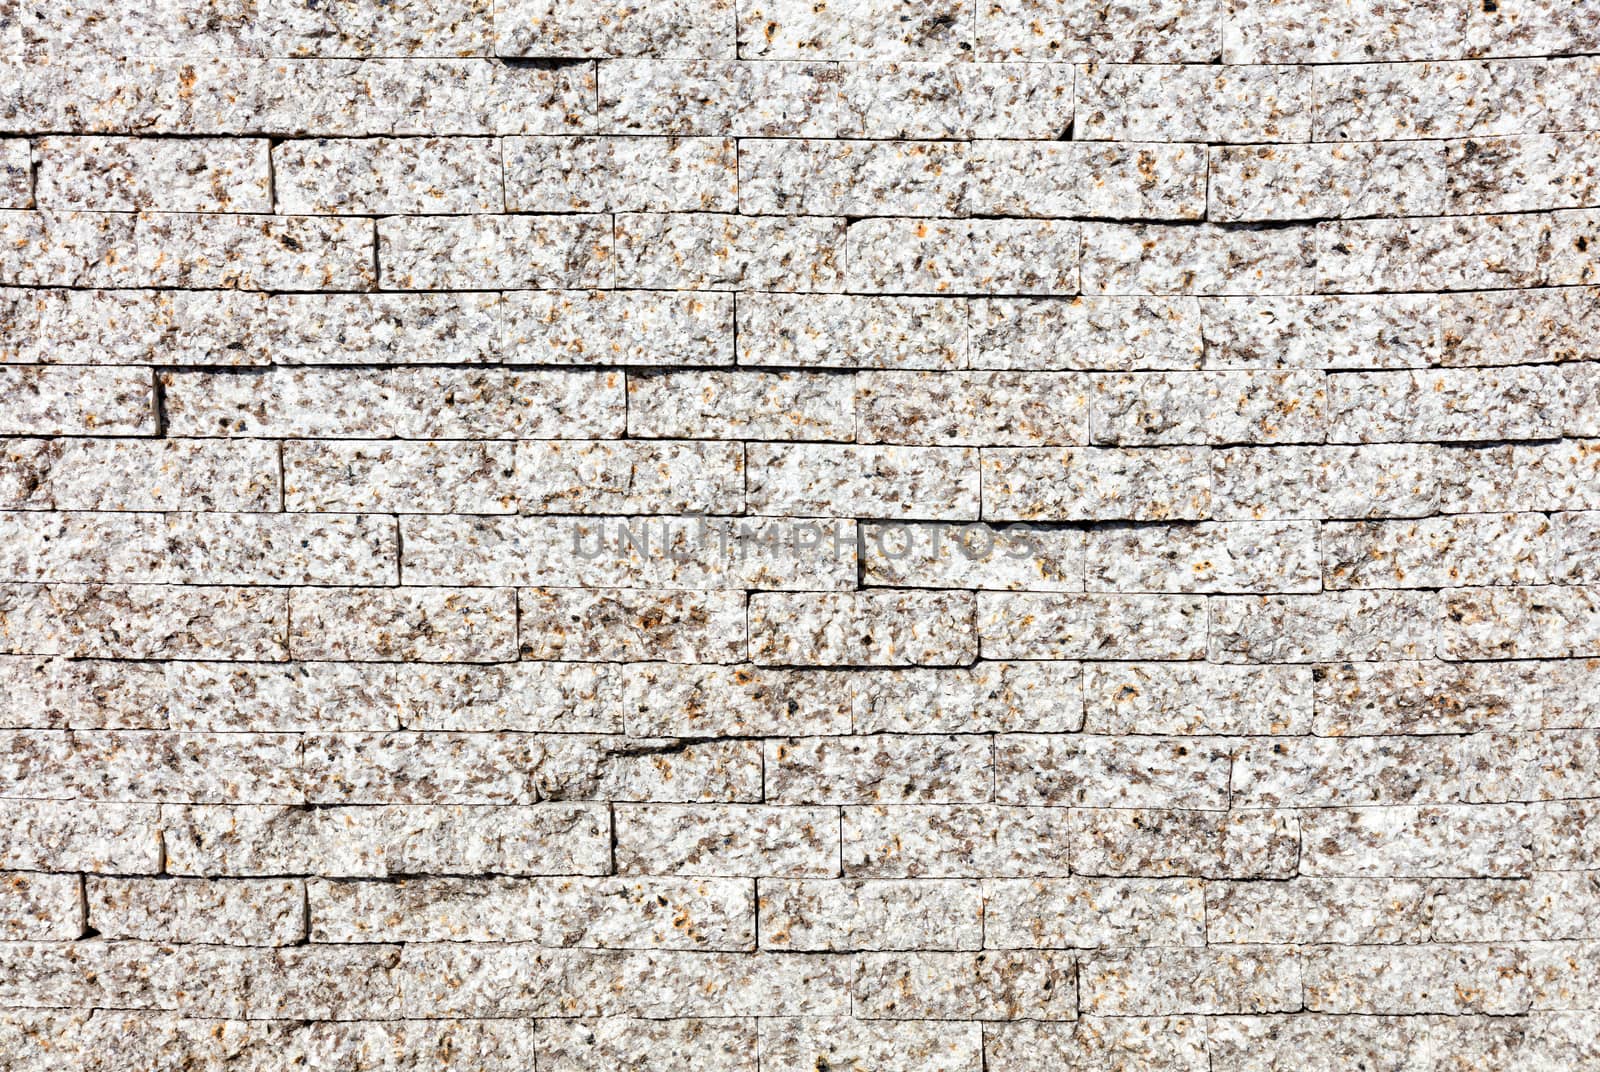 The wall is faced with gray granite stripes, close-up. by Sergii